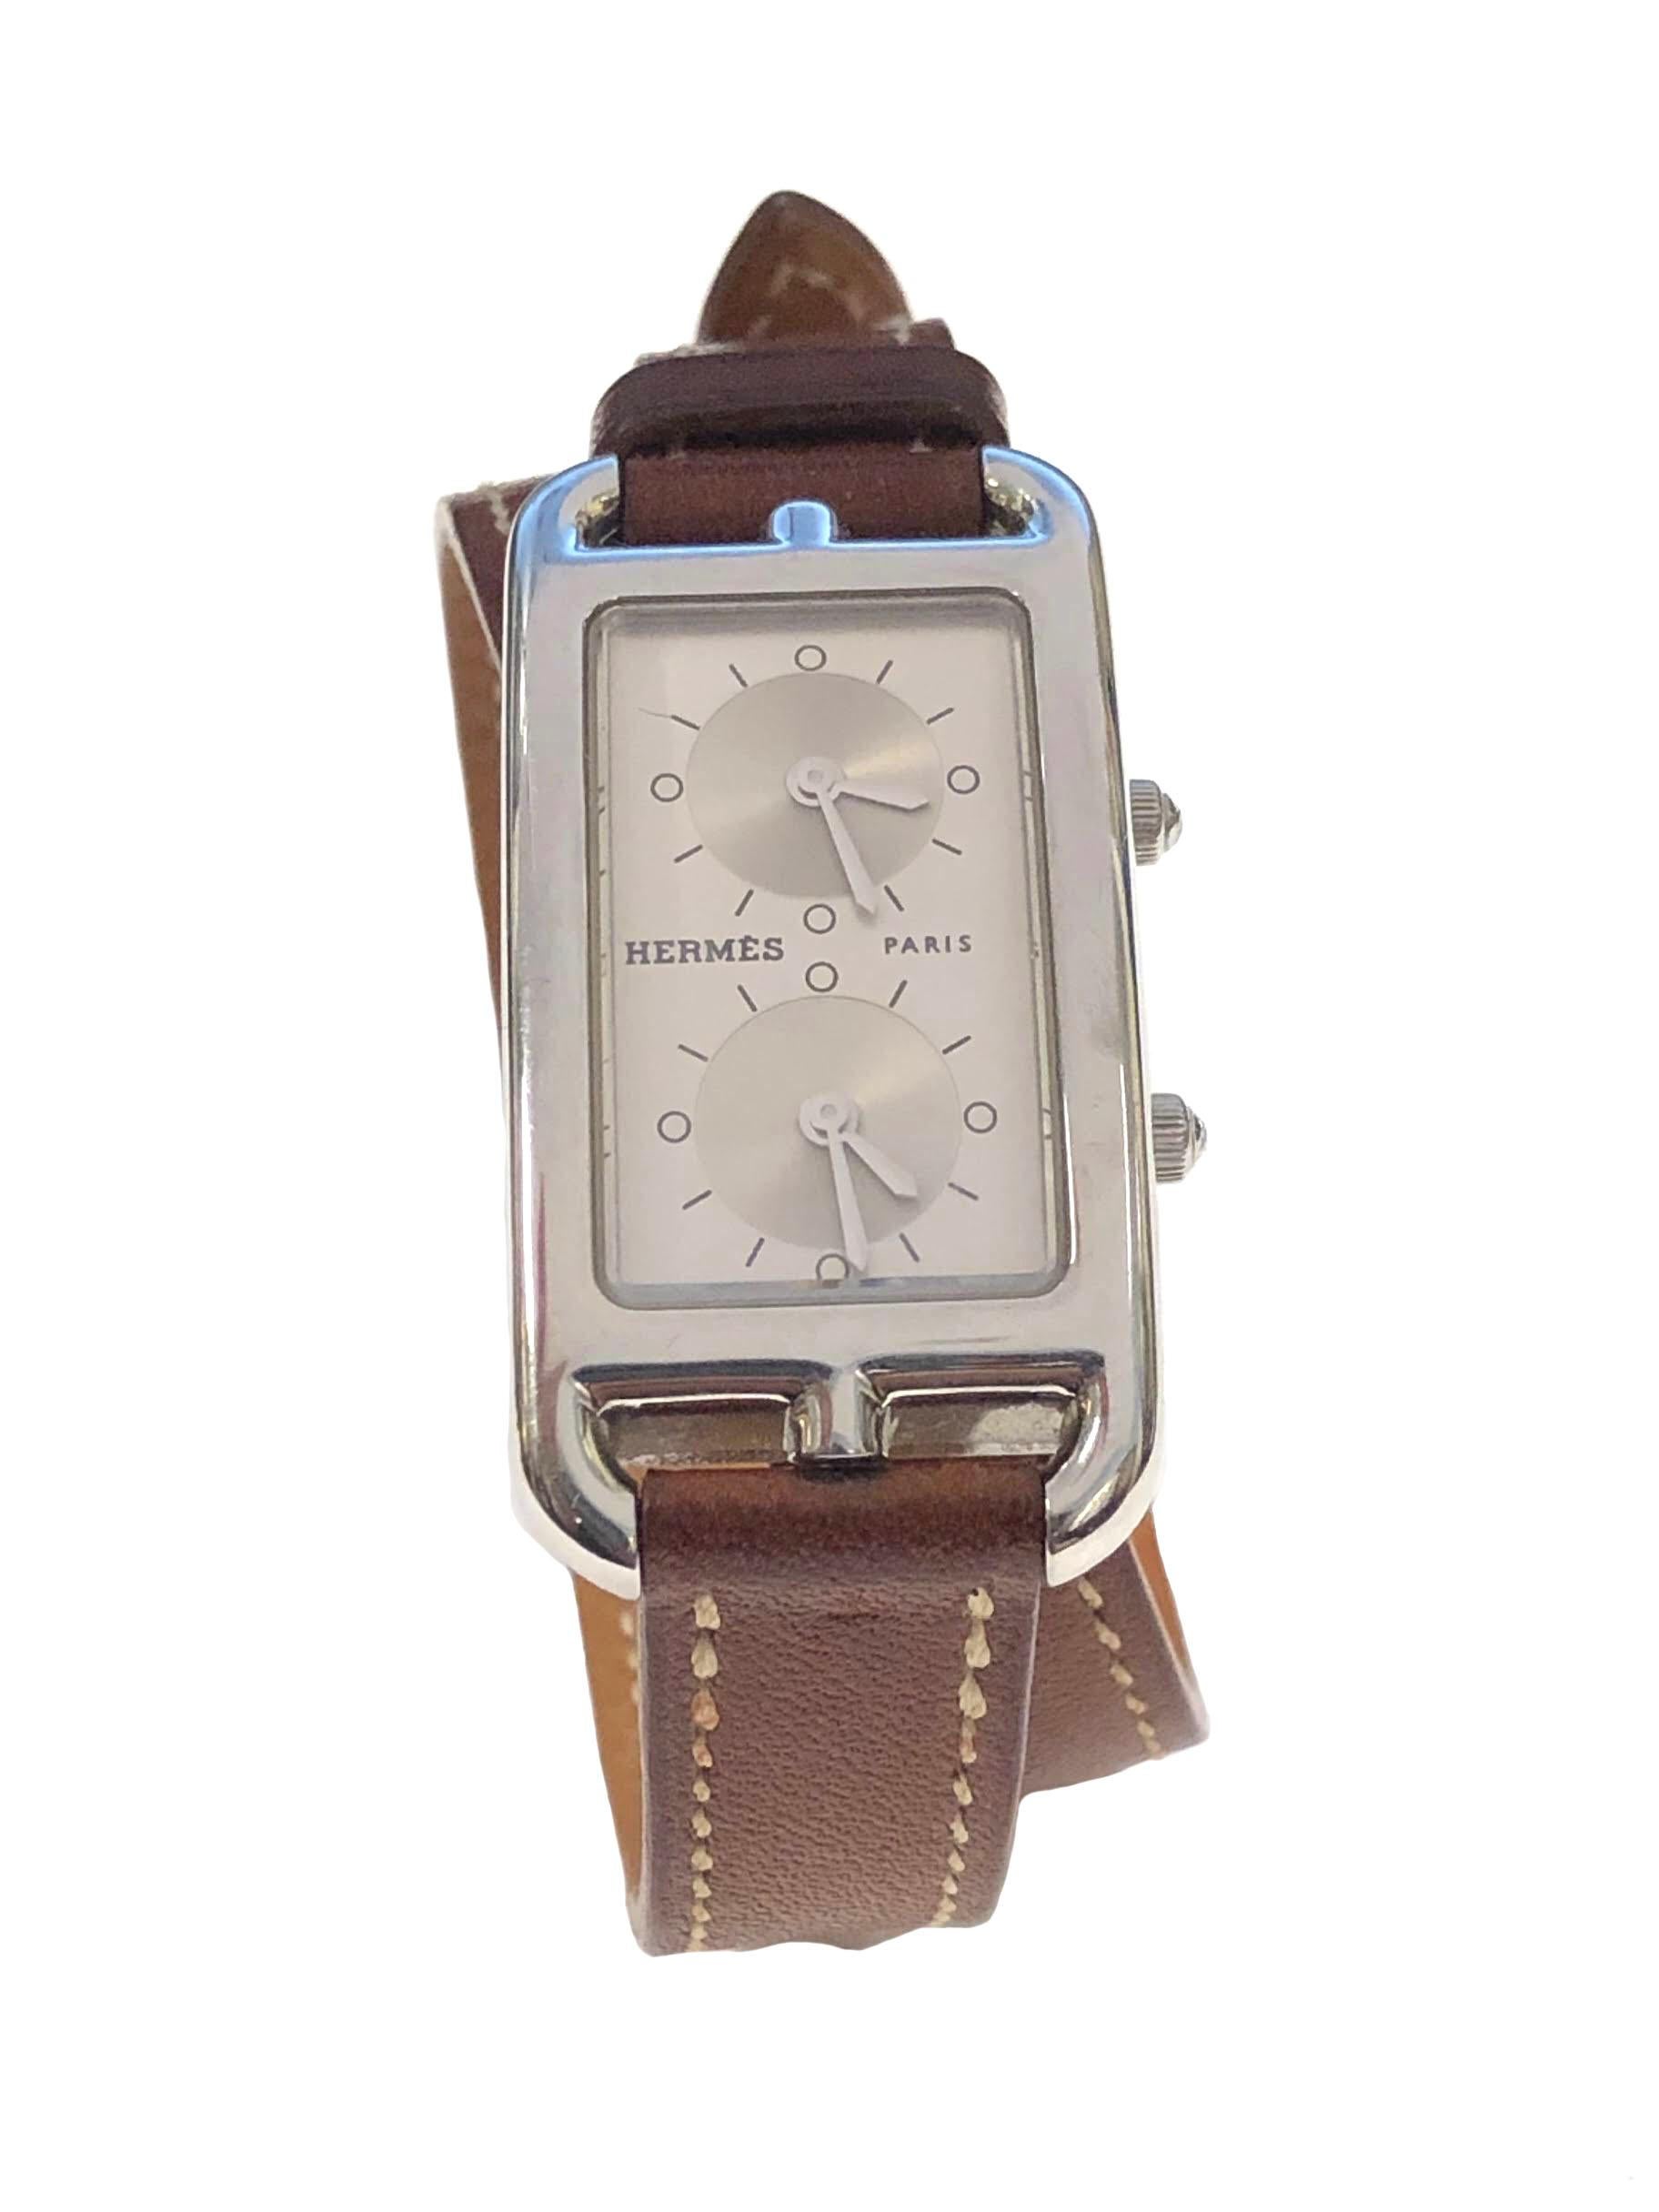 Circa 2018 Hermes Cape Cod Dual Time Zone Wrist Watch, Reference # CC3.210, 40 X 20 M.M. 2 Piece Stainless Steel case. @ independent Quartz Movements, Silver Dial. Original and near Unused Light Brown 7/16 inch wide Leather Wrap Around Strap with